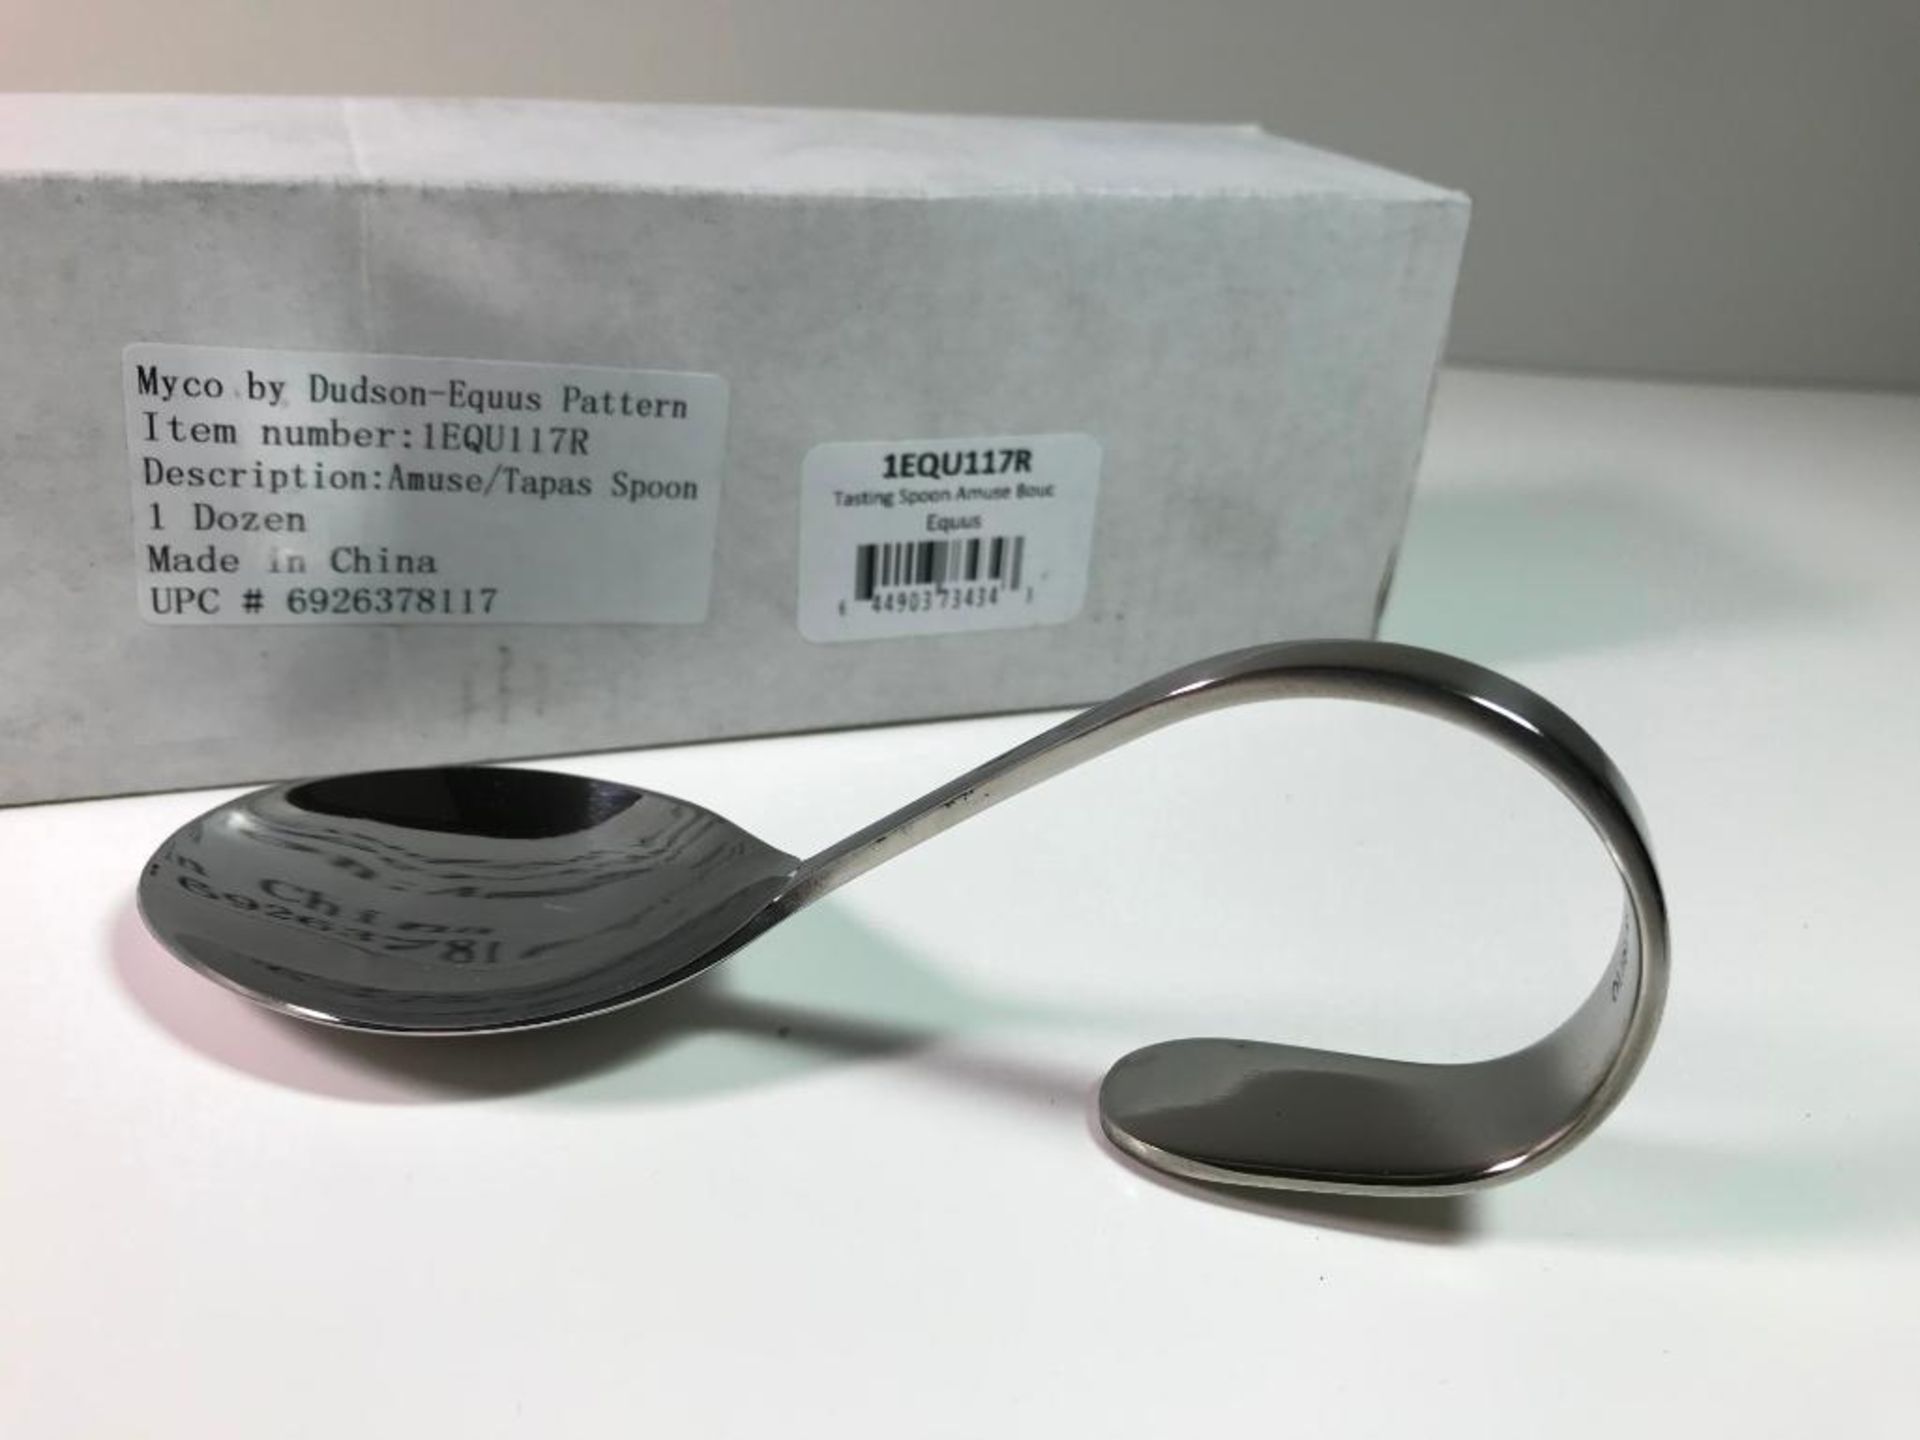 DUDSON EQUUS 5.25" TASTING SPOON - 12/CASE - NEW - Image 4 of 4